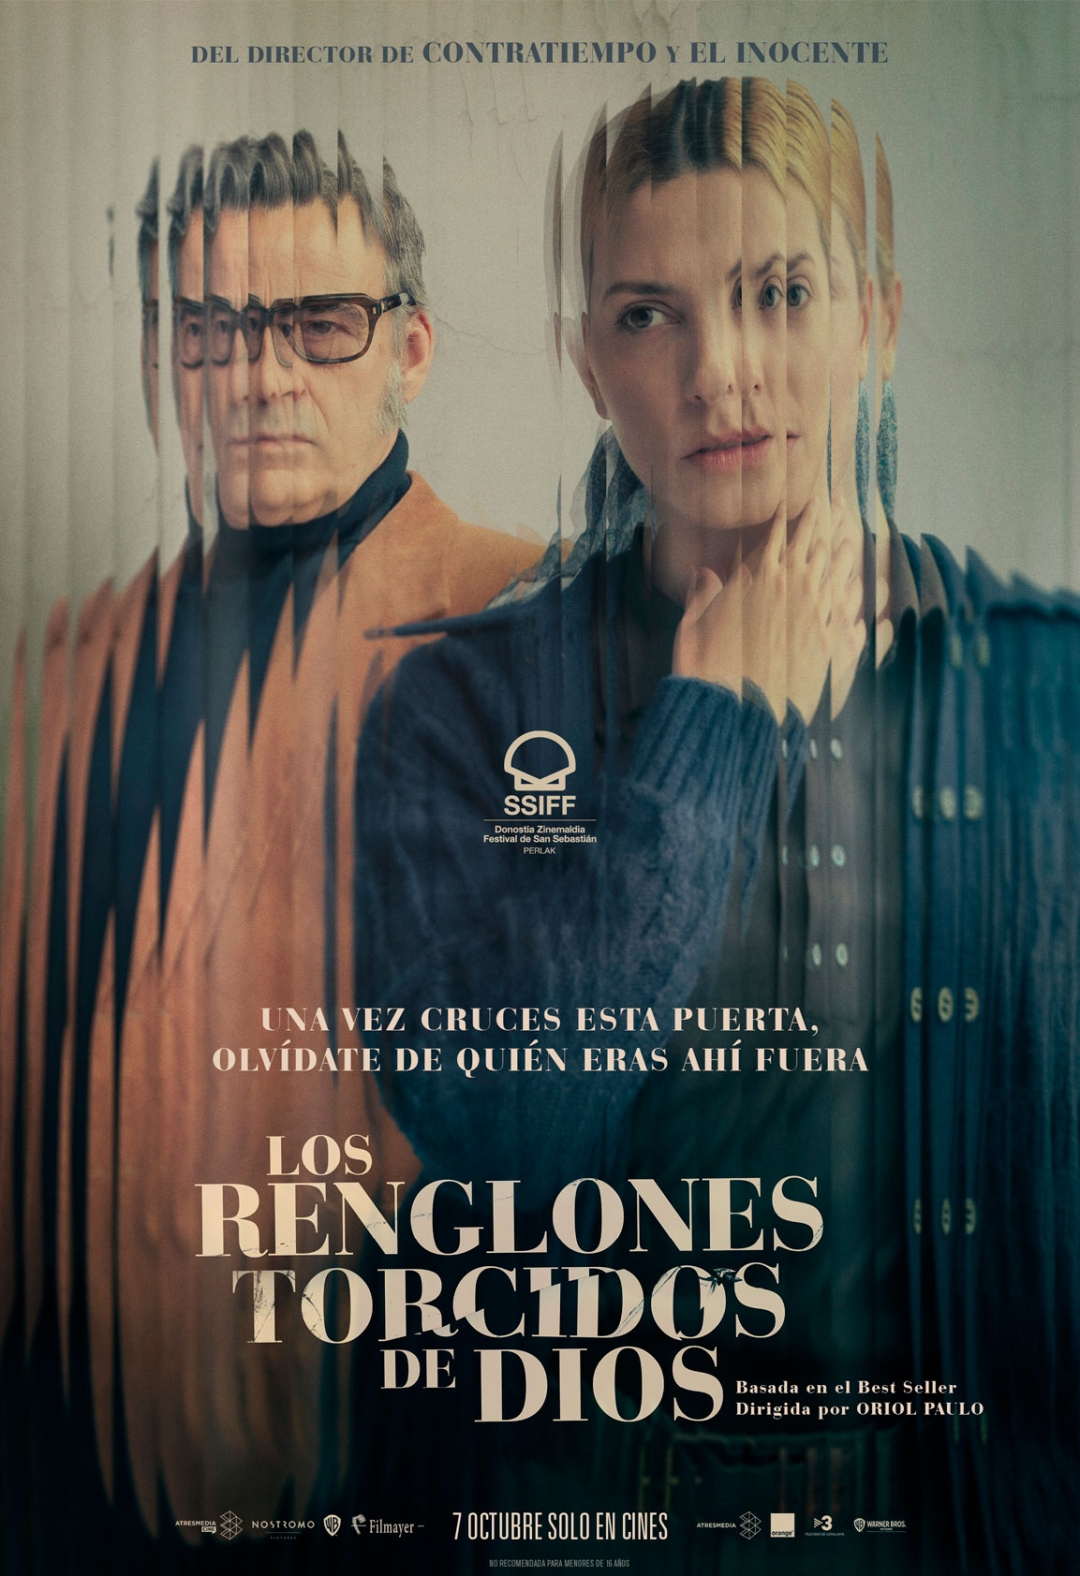 Poster for ‘God’s Crooked Lines’, whose soundtrack has won Fernando Velázquez his fifth Goya nomination